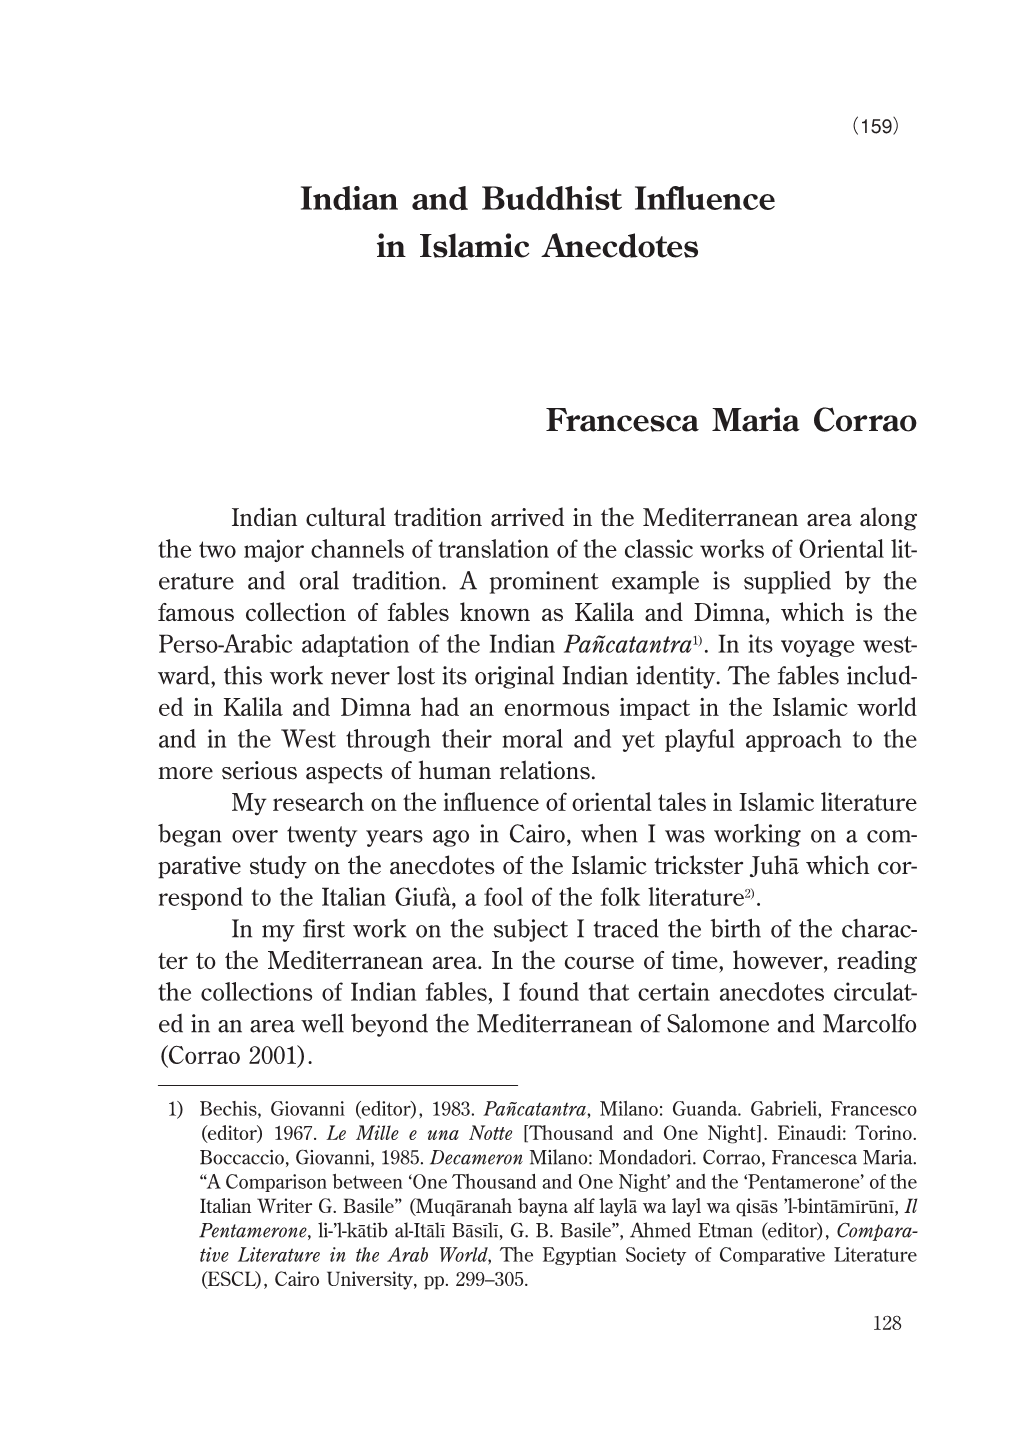 Indian and Buddhist Influence in Islamic Anecdotes Francesca Maria